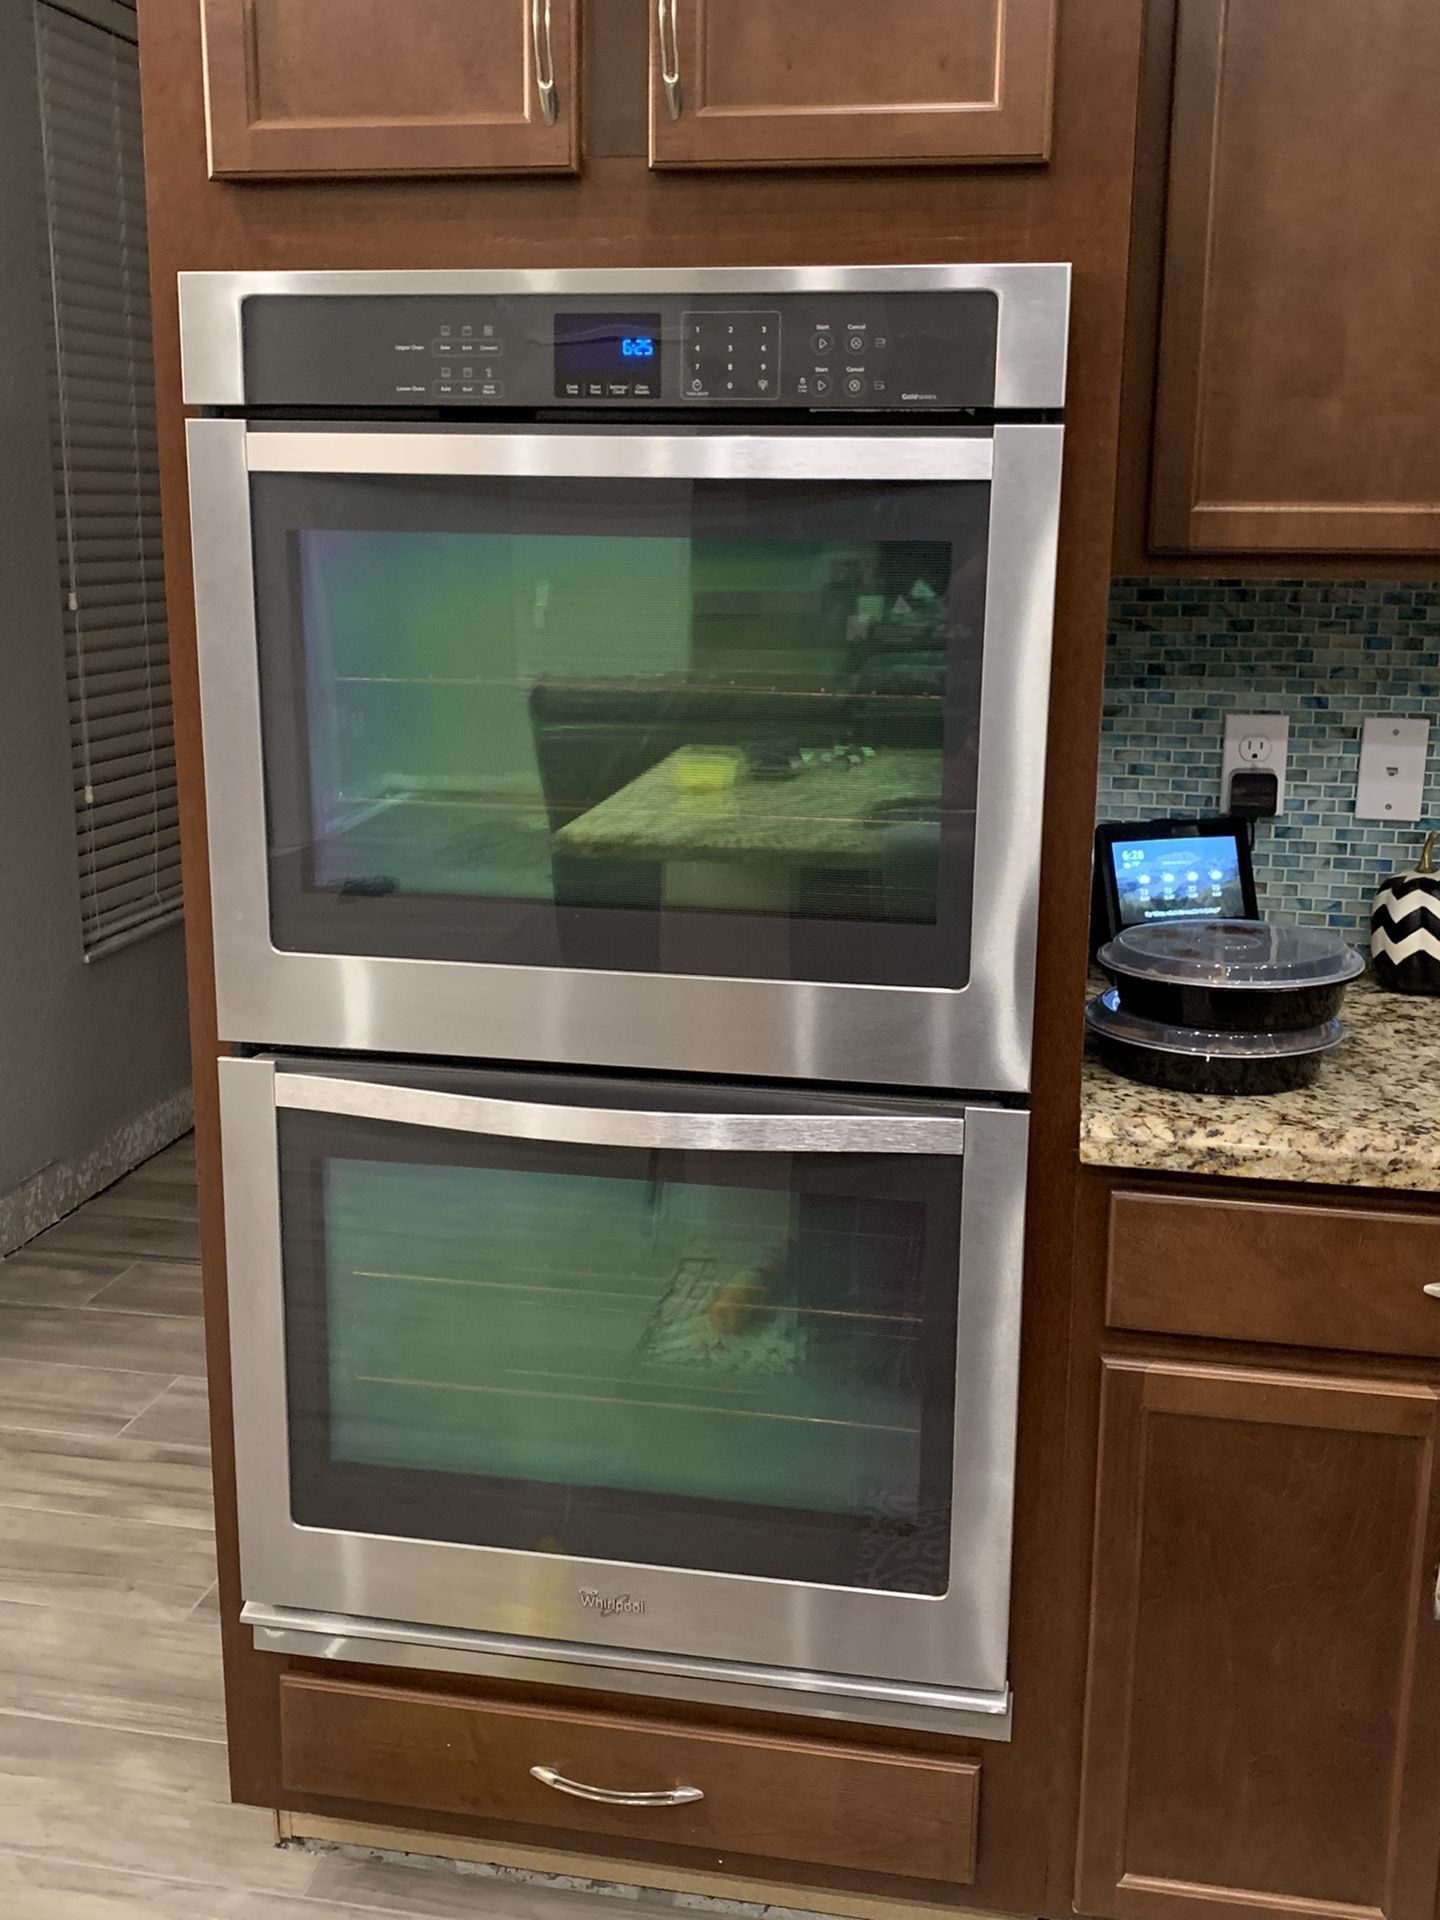 Whirpool Stainless Steel Double Wall Oven